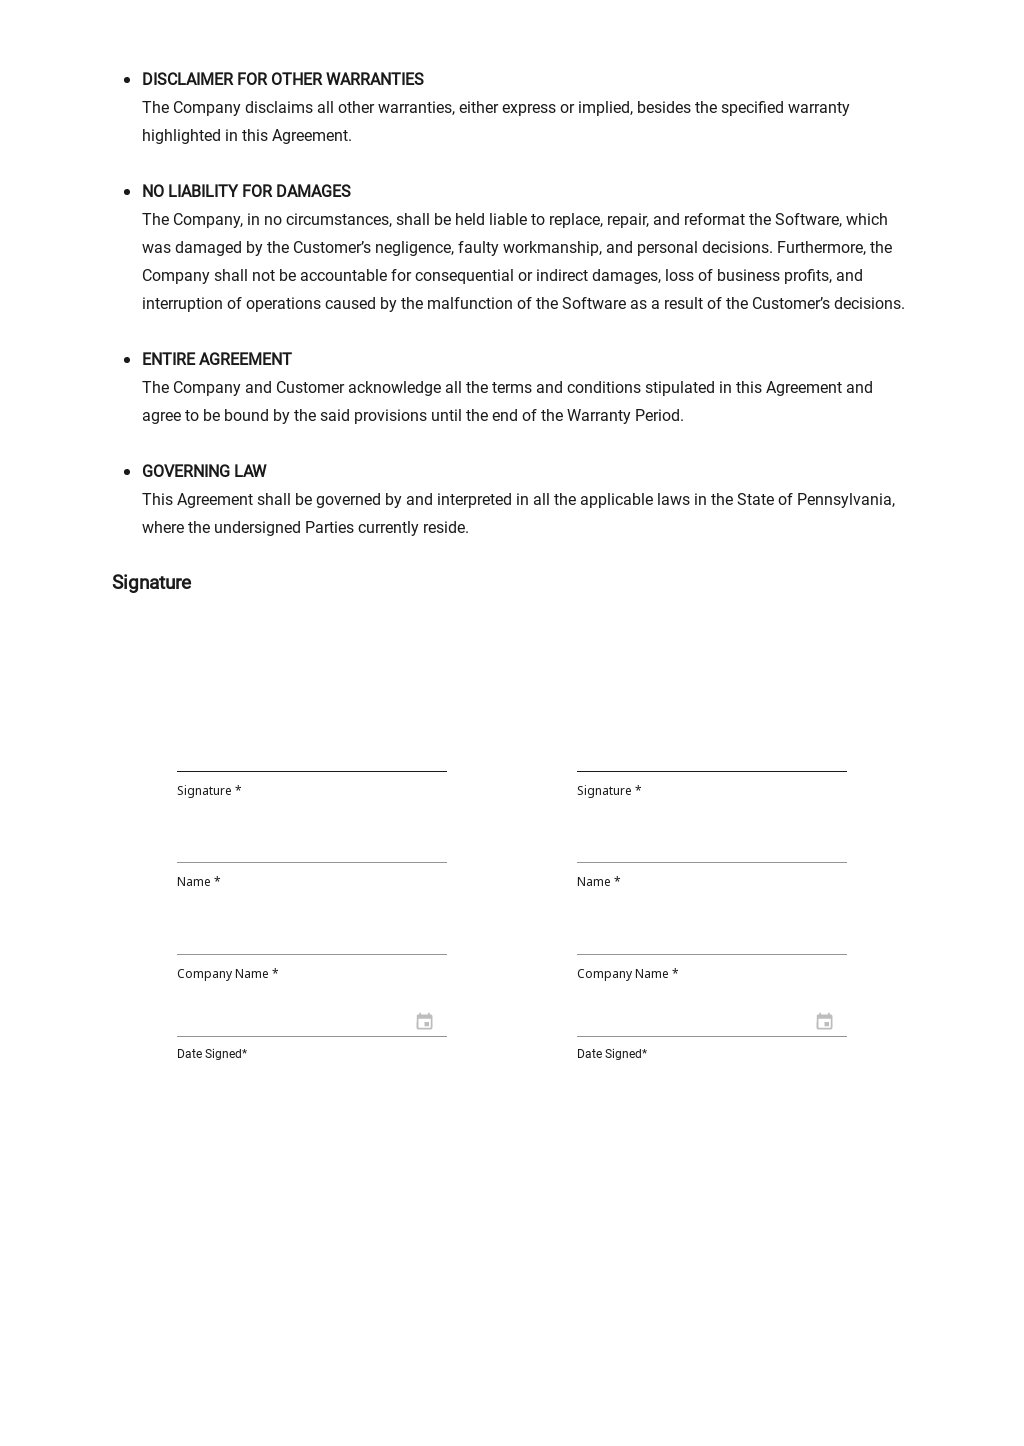 Limited Warranty Template - Google Docs, Word  Template.net Intended For limited warranty agreement template